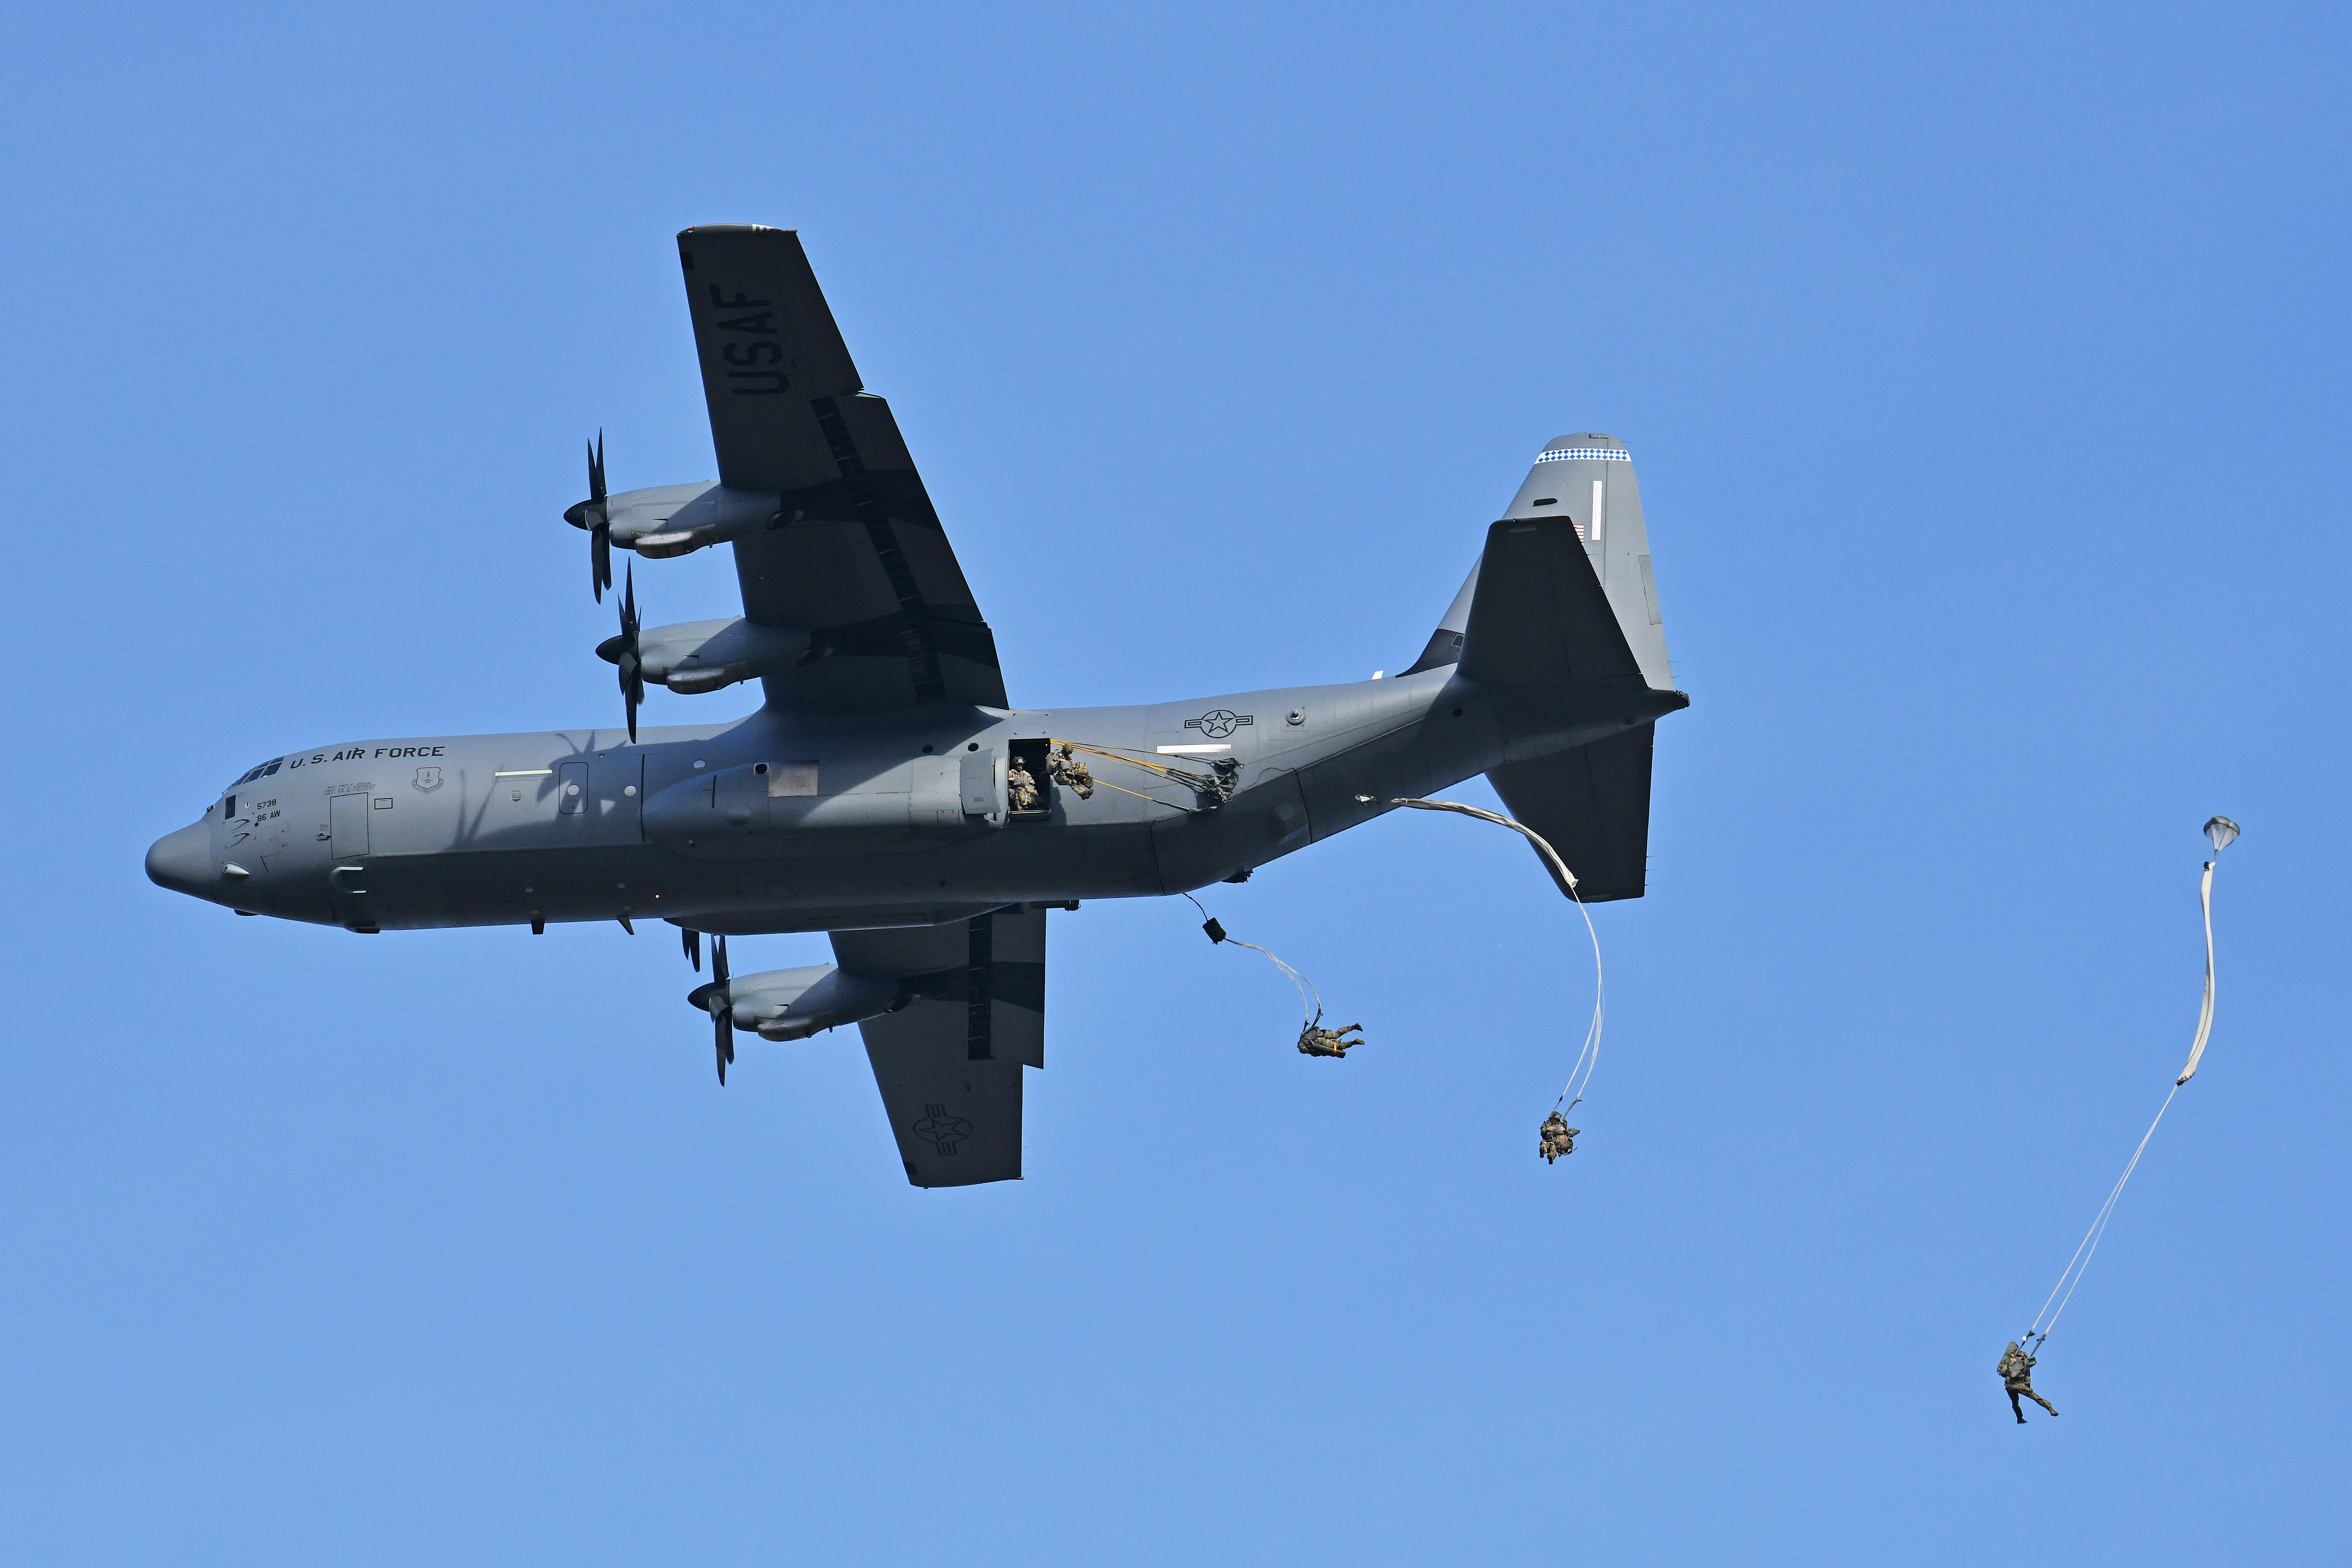 U.S. paratroopers jump from a C-130 Hercules aircraft over Juliet